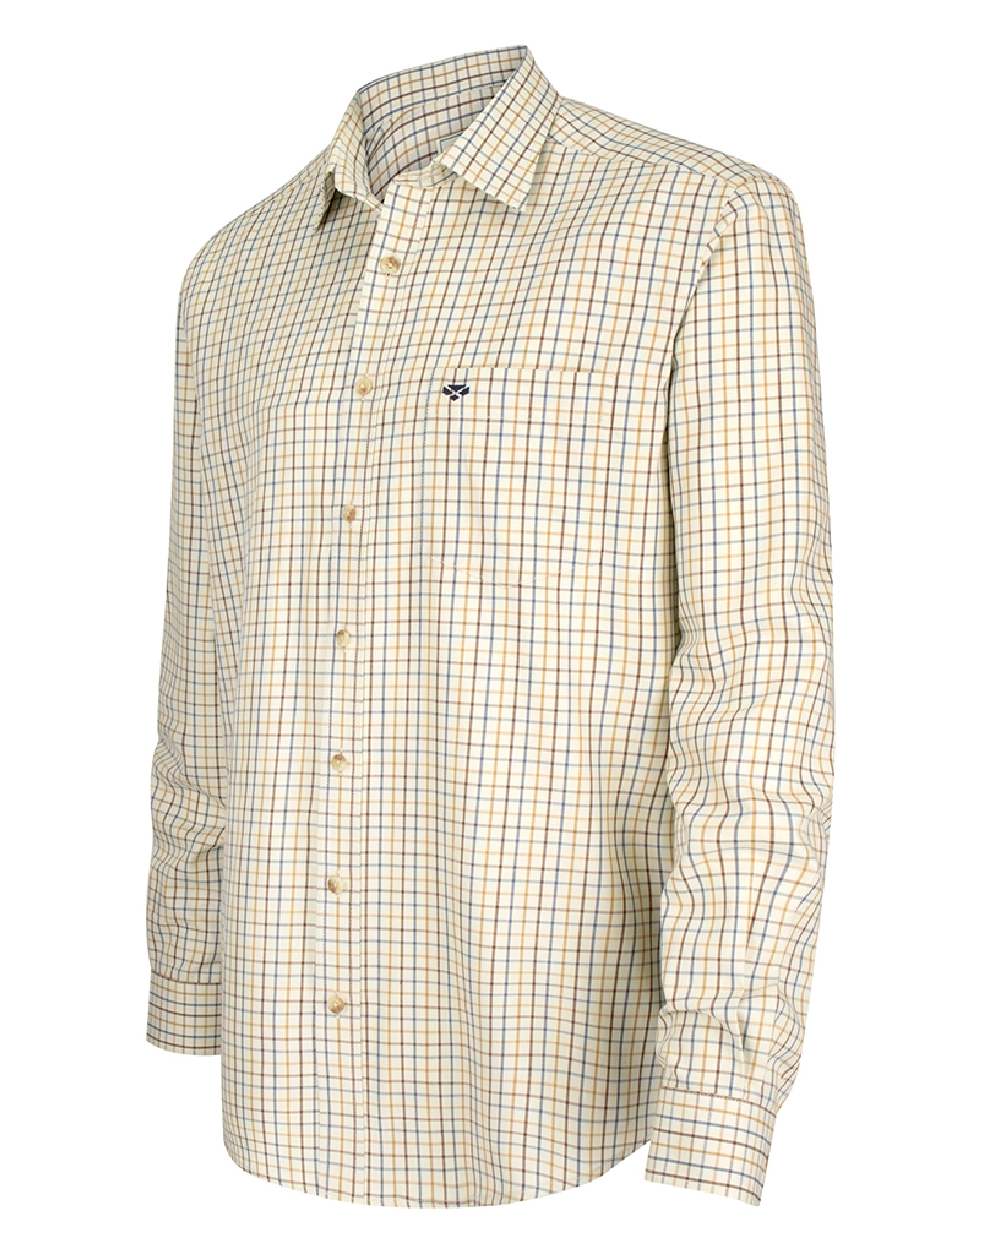 Short Sleeve Checked Shirt by Hoggs of Fife